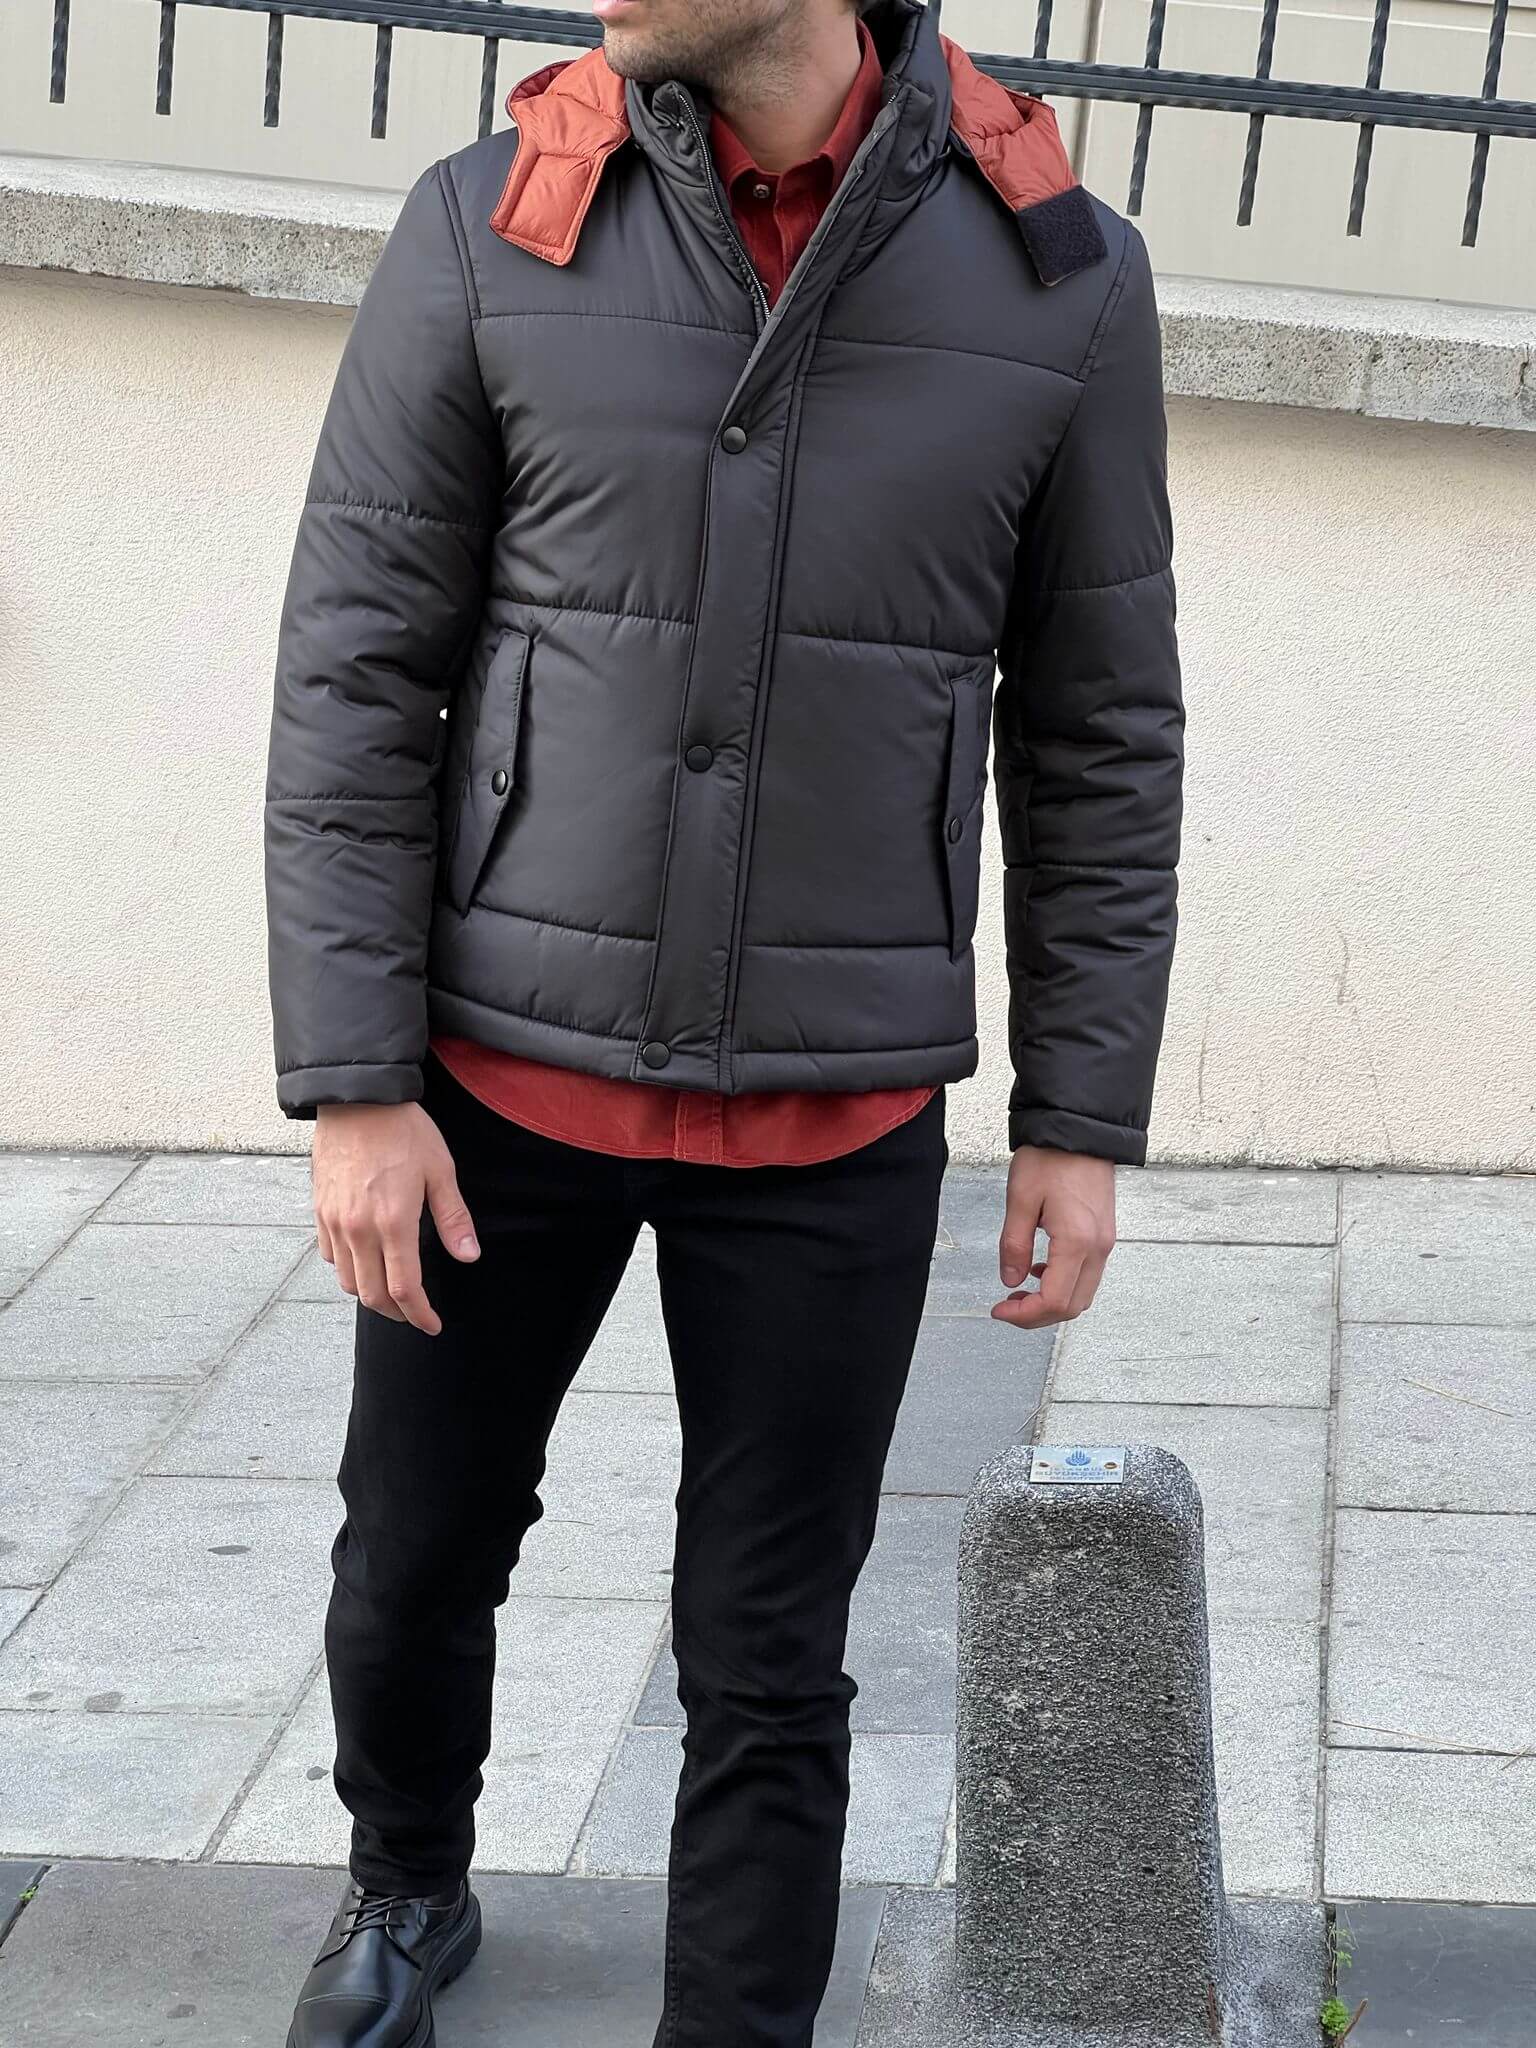 Elegance meets streetwear: Stylish young man in a black hooded coat, embodying casual cool.